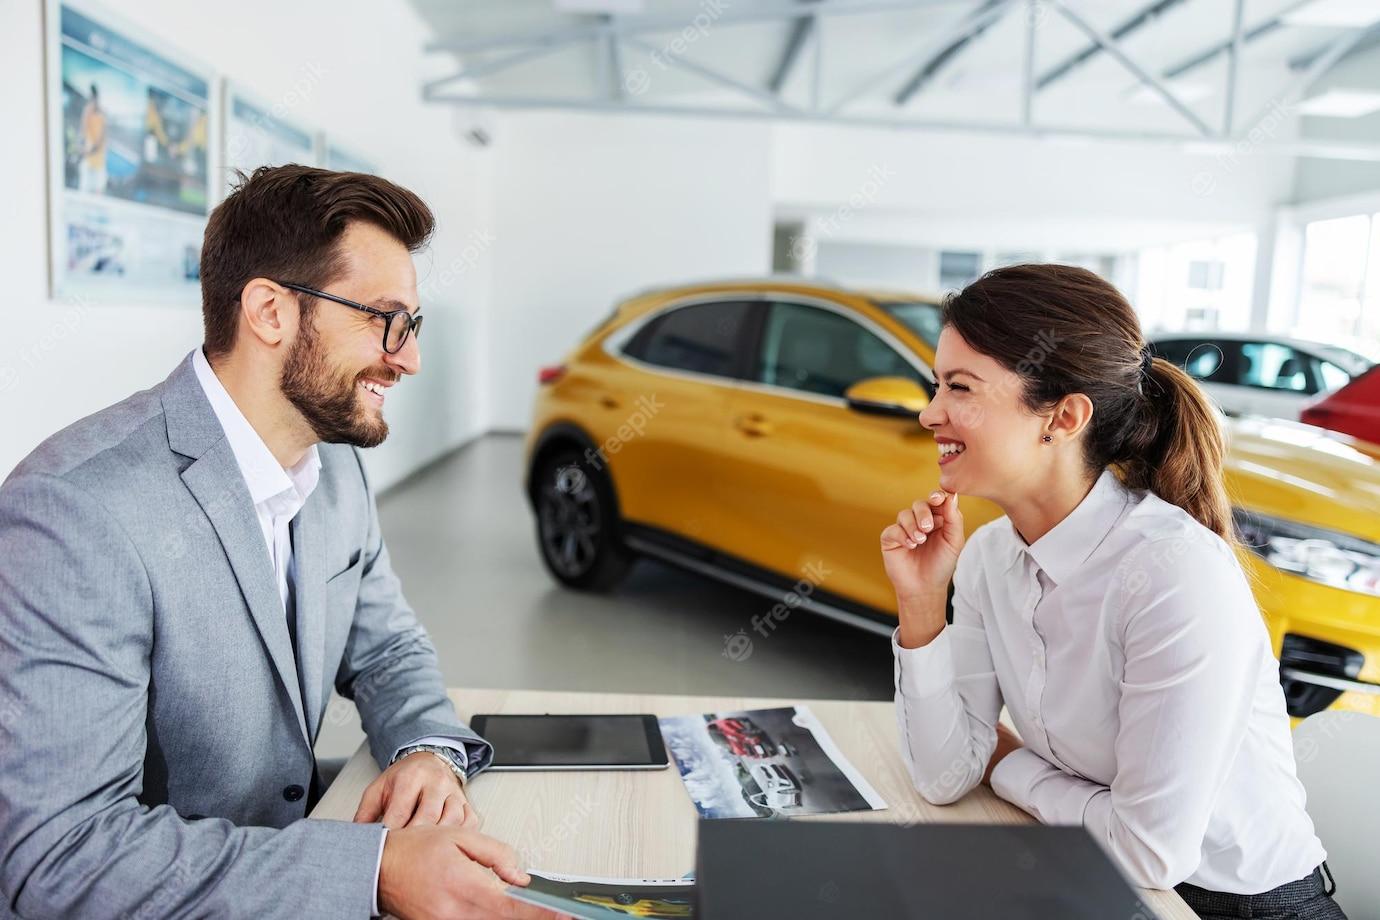 get-the-best-deal-on-selling-your-vehicle-with-vehicle-buyers